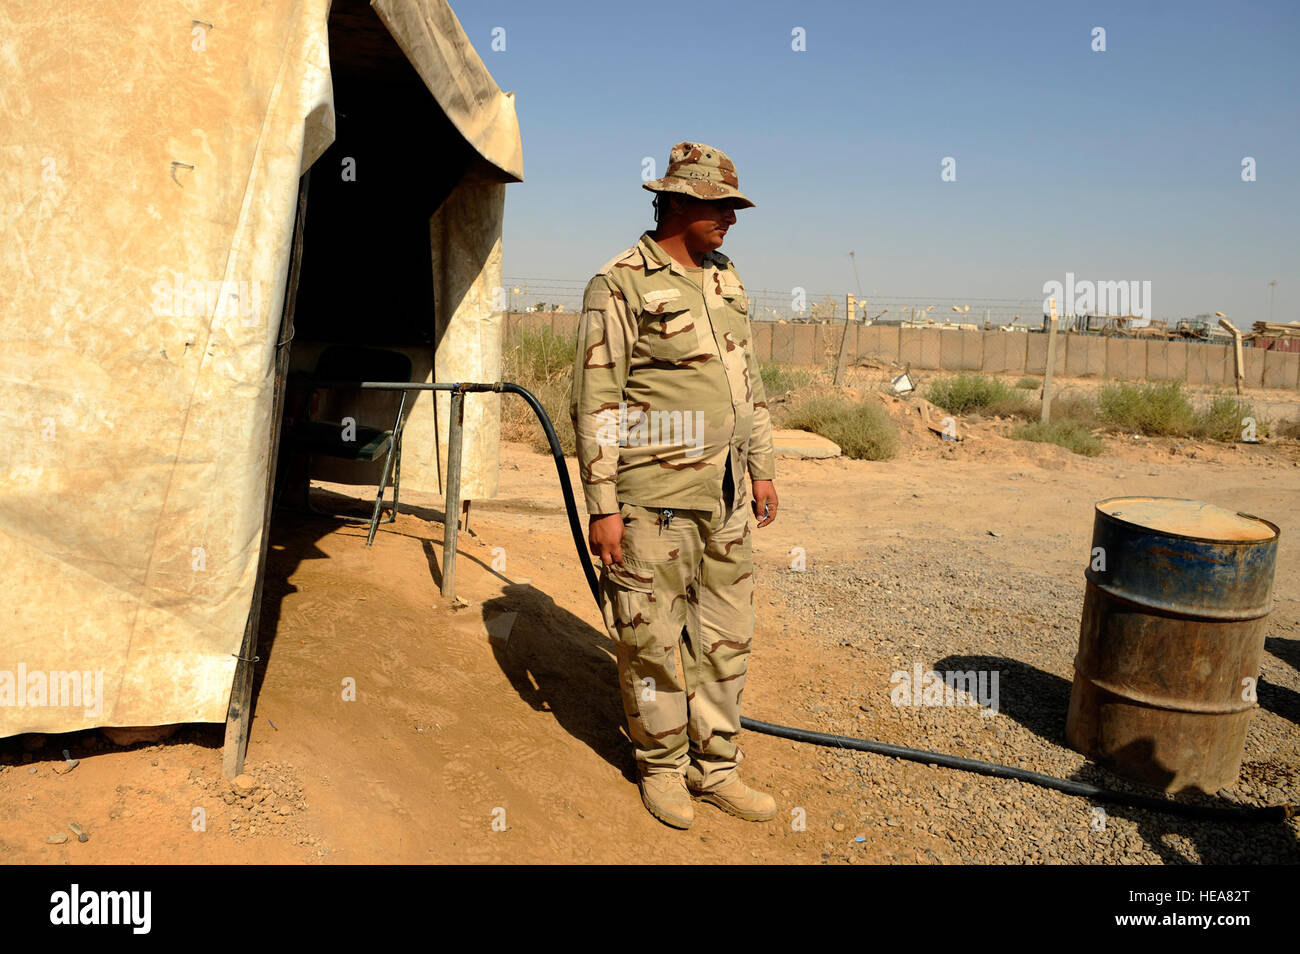 An Iraqi soldier waits to refuel a vehicle at Camp Taji, near Baghdad, Iraq, July 11. The Iraqi fuels depot is run exclusively by the Iraqi army with some assistance from an American Airman assigned to the Logistics Military Advisor Team. Stock Photo